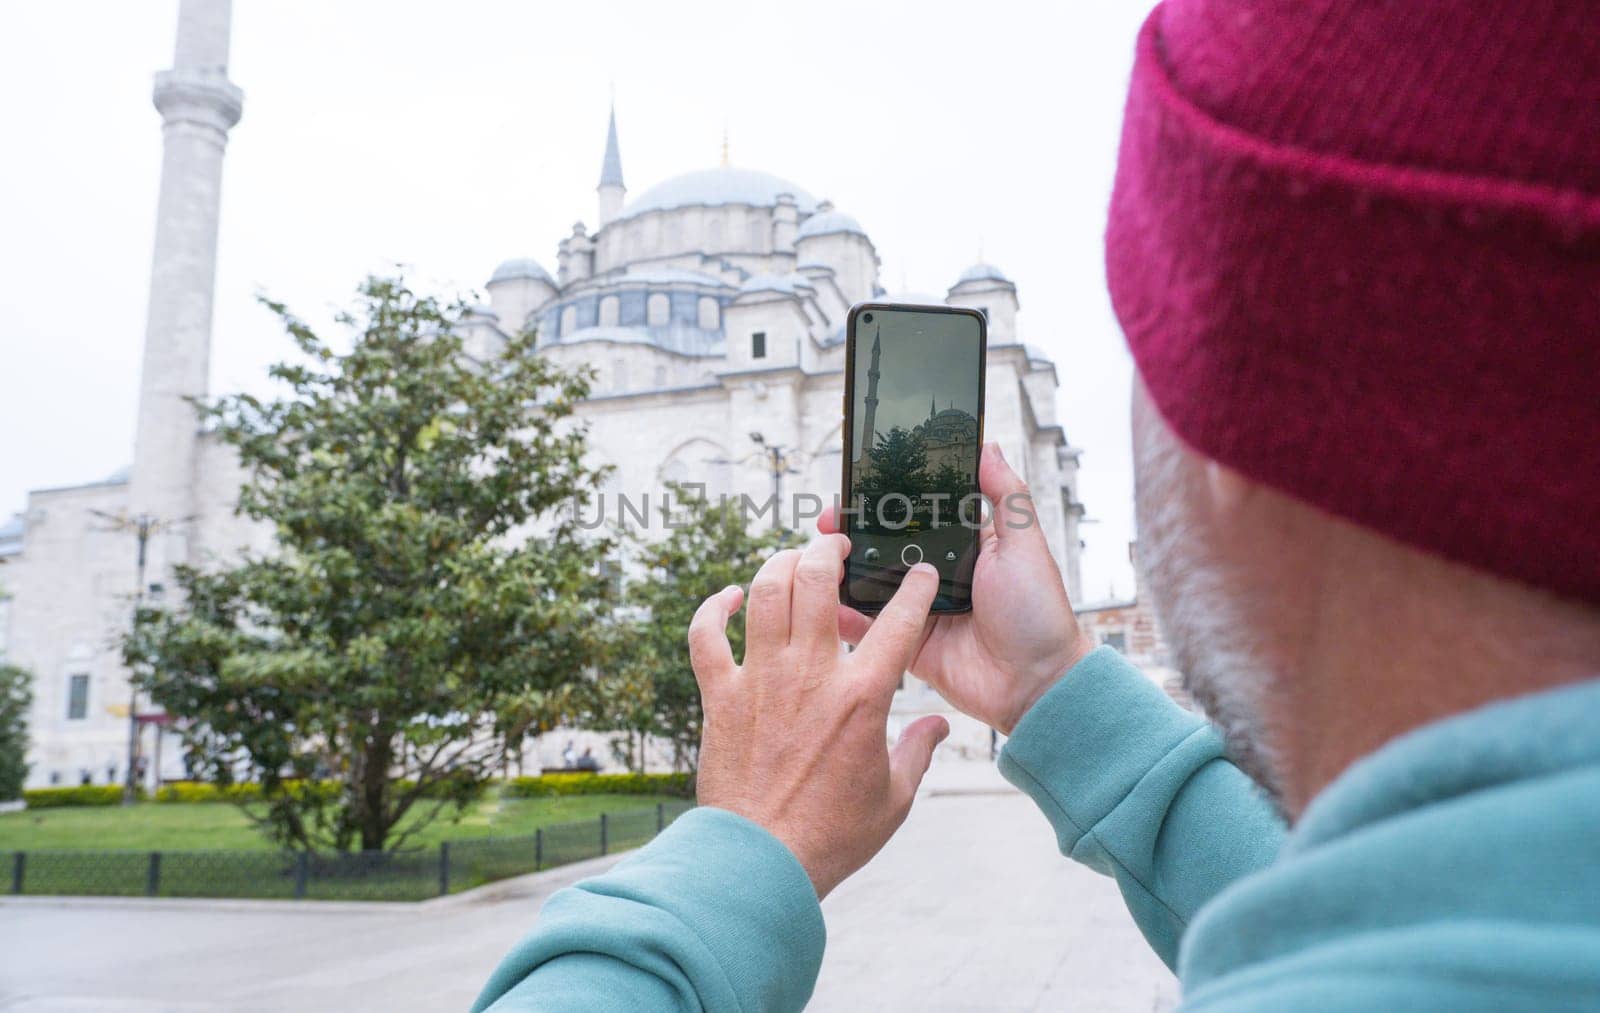 A male tourist takes a photo of the Fatih Mosque in Istanbul, Turkey as a keepsake